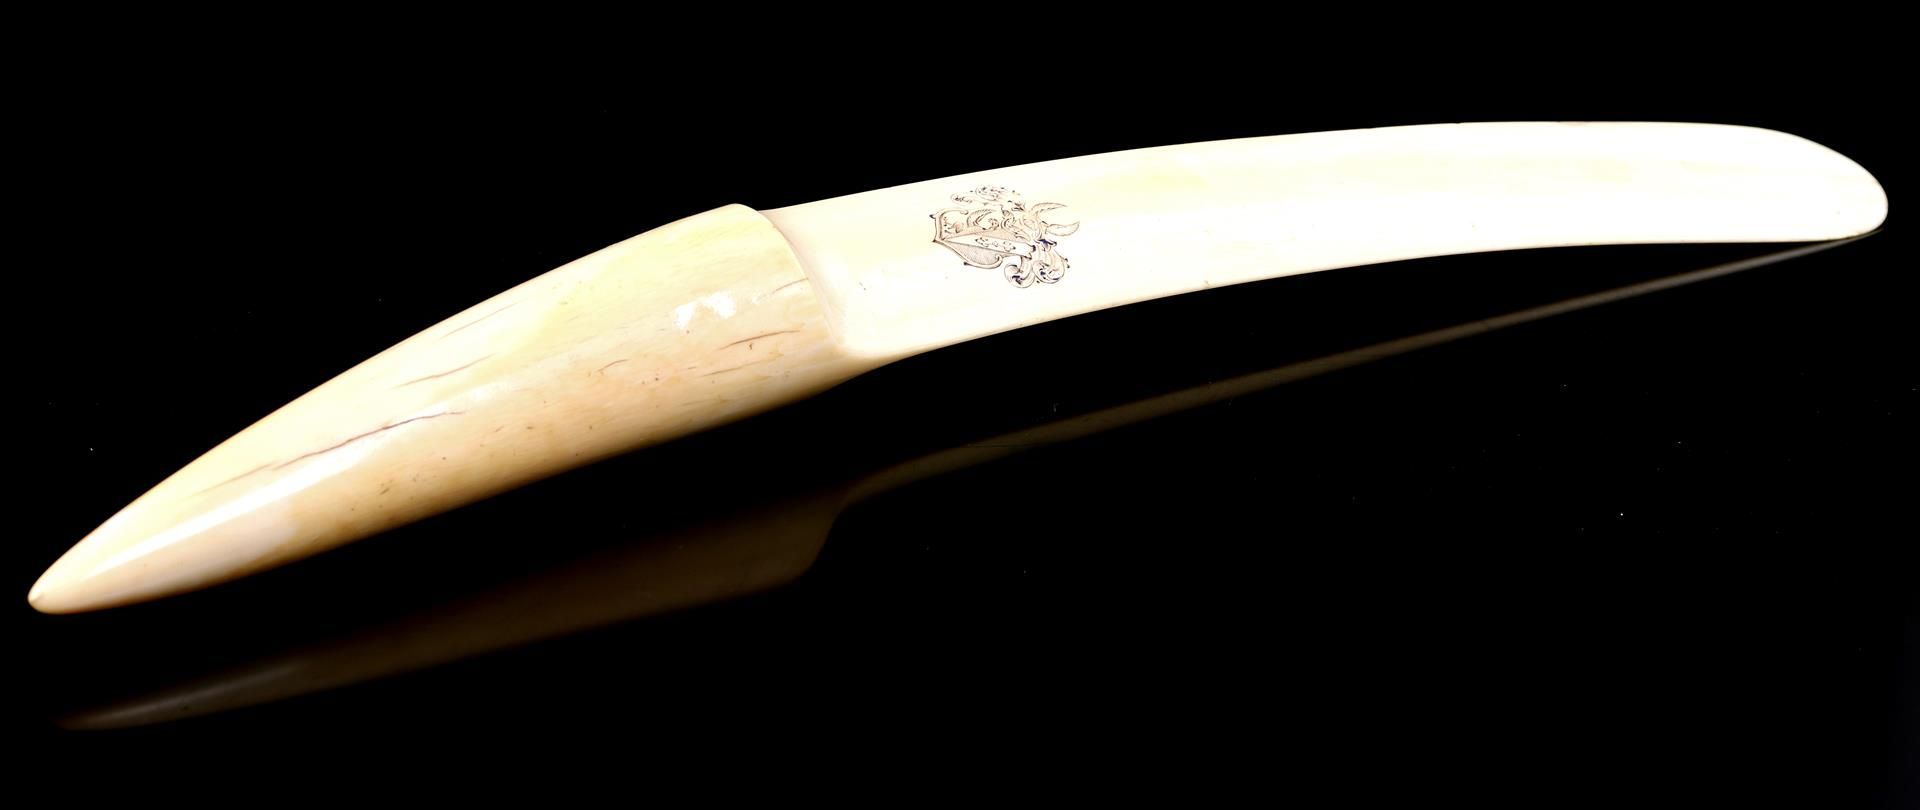 Ivory spatula for turning pages, page turner with coat of arms, Europe approx. 1890, 41 cm long, 276